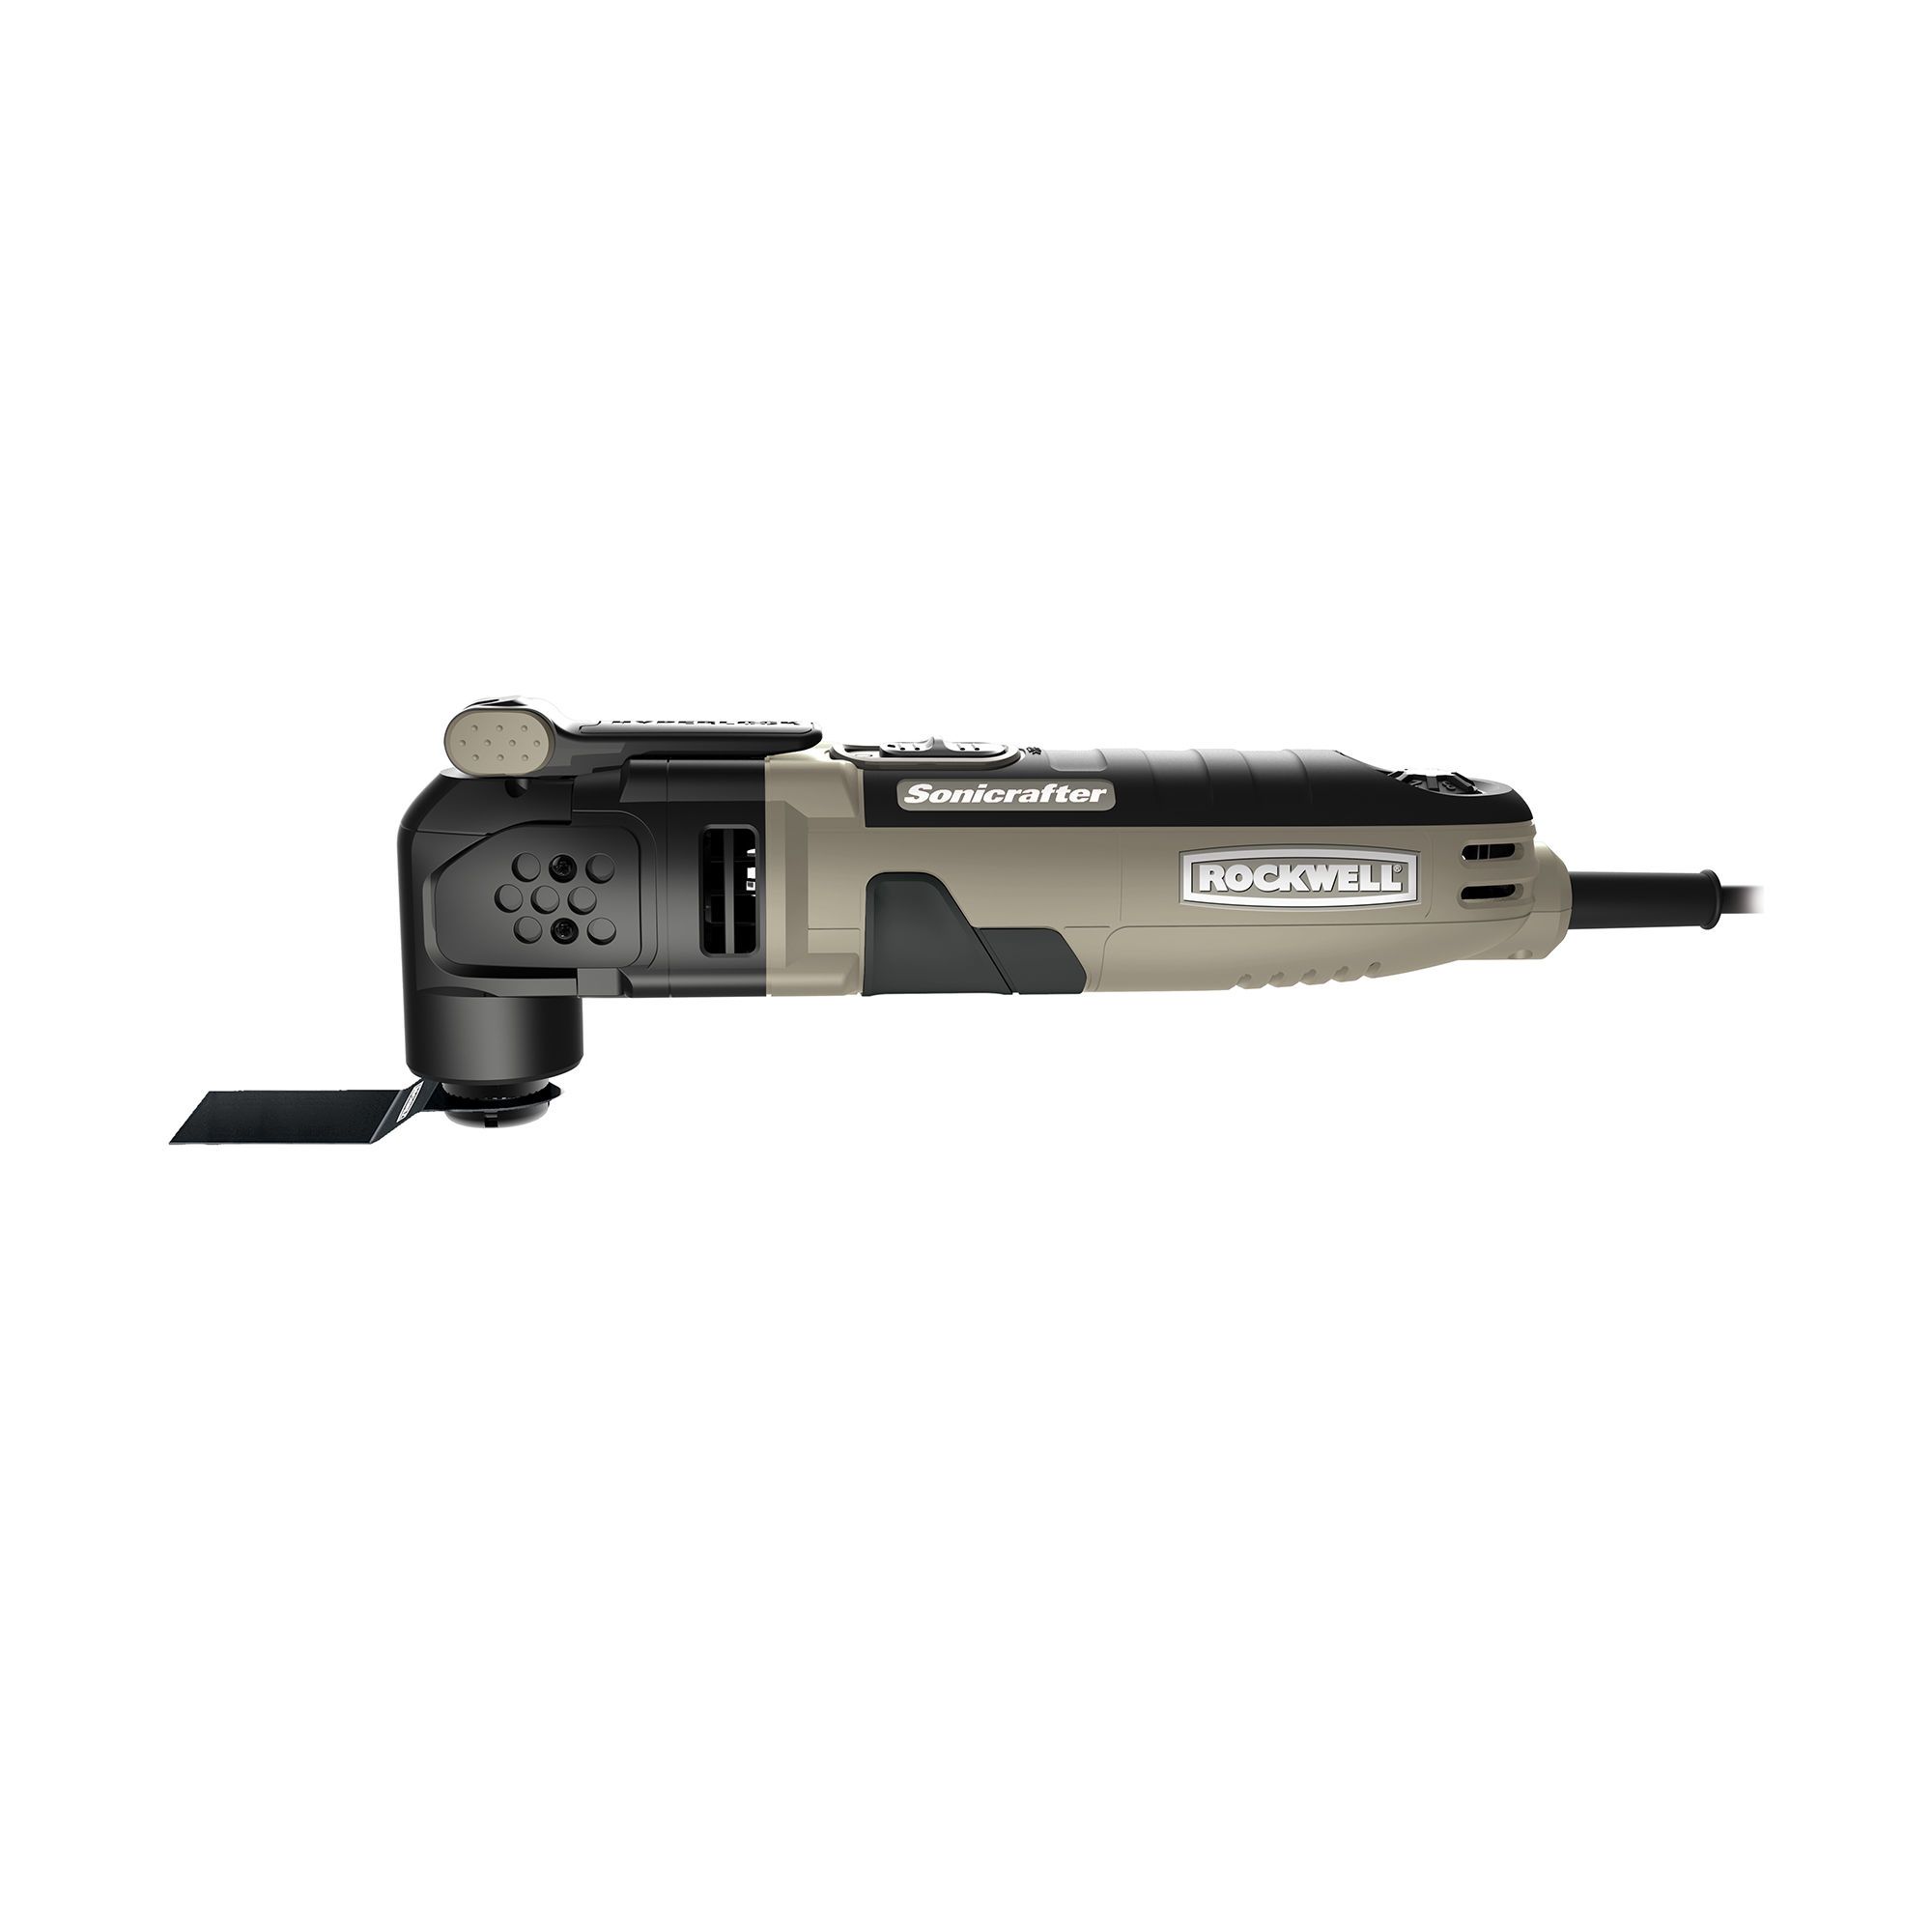 ROCKWELL oscillating tool from ROCKWELL BMR